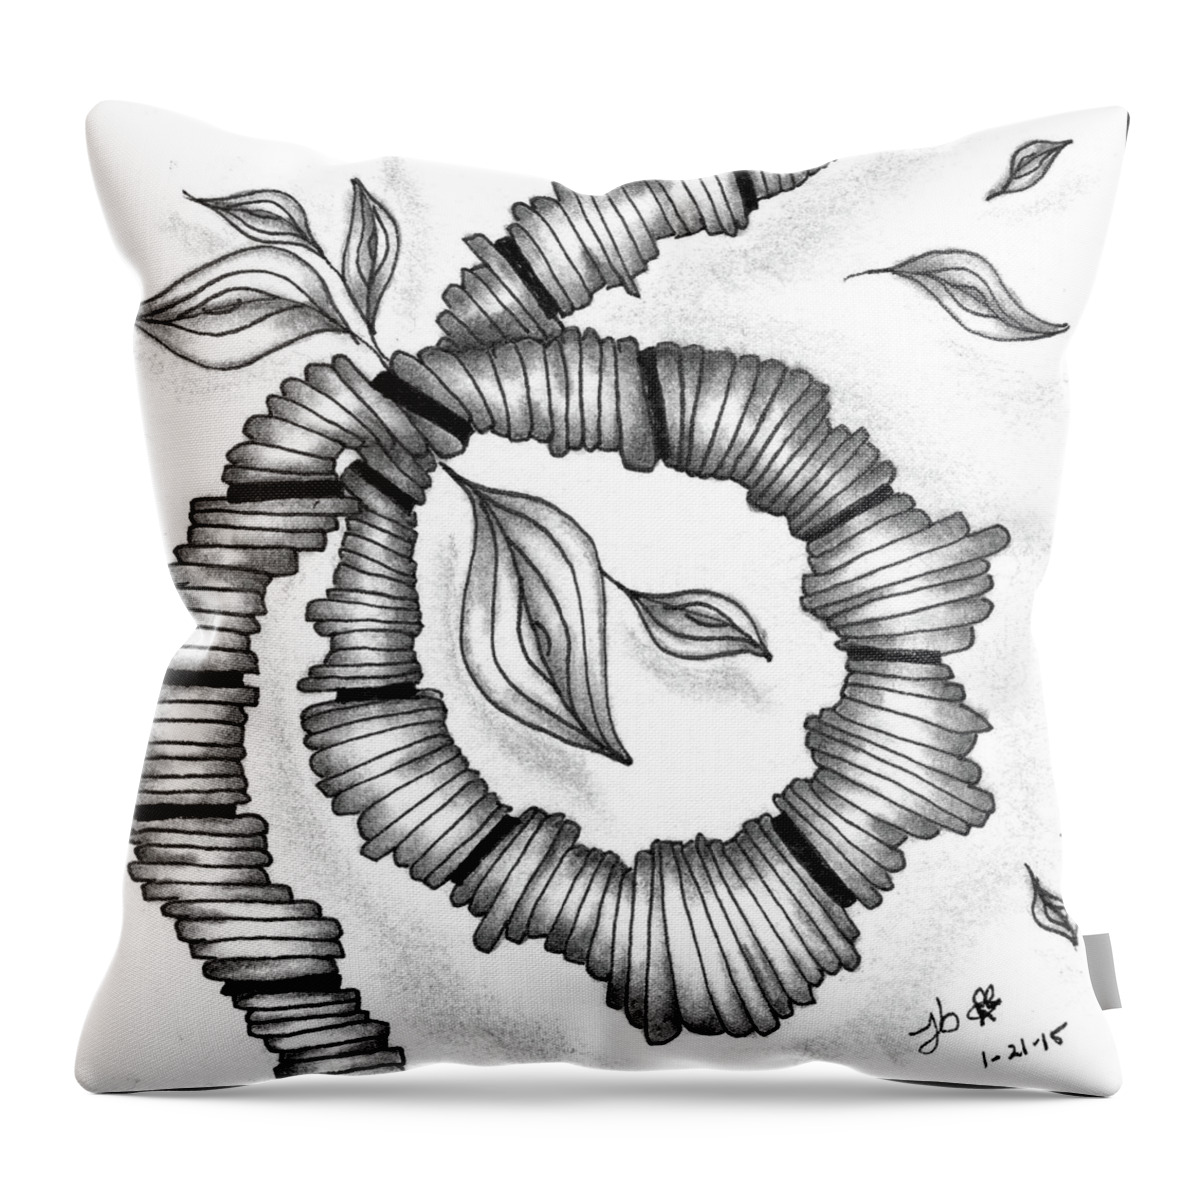 Zentangle Throw Pillow featuring the drawing Knot Today, Please by Jan Steinle